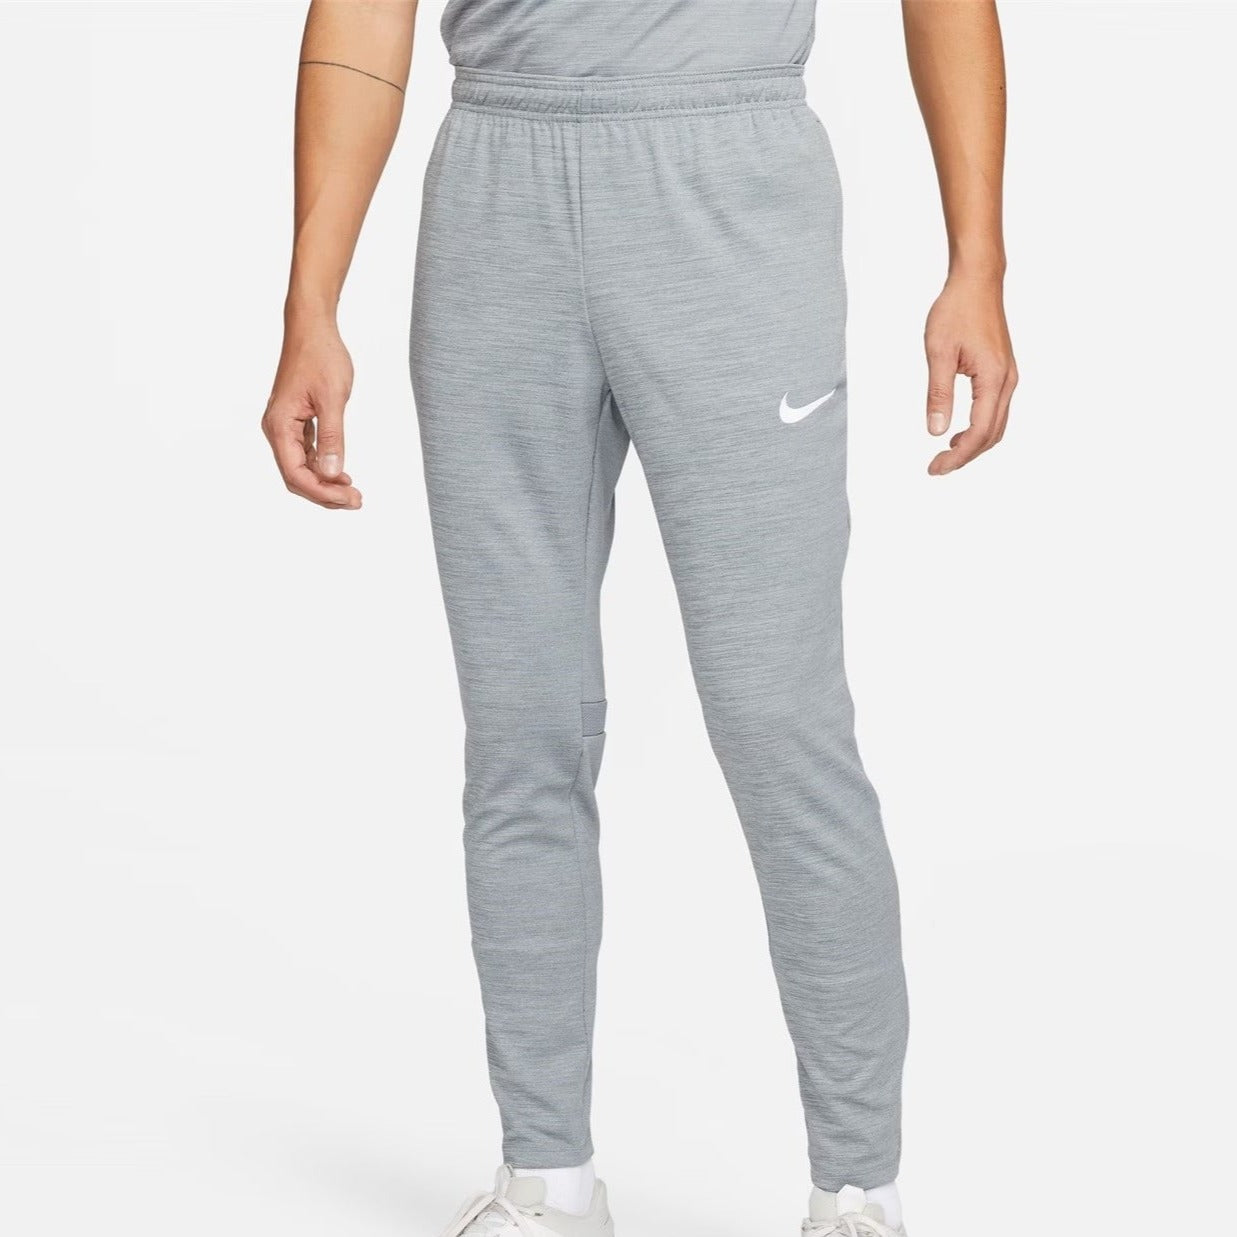 NIKE ACADEMY PRO TROUSERS - COOL GREY